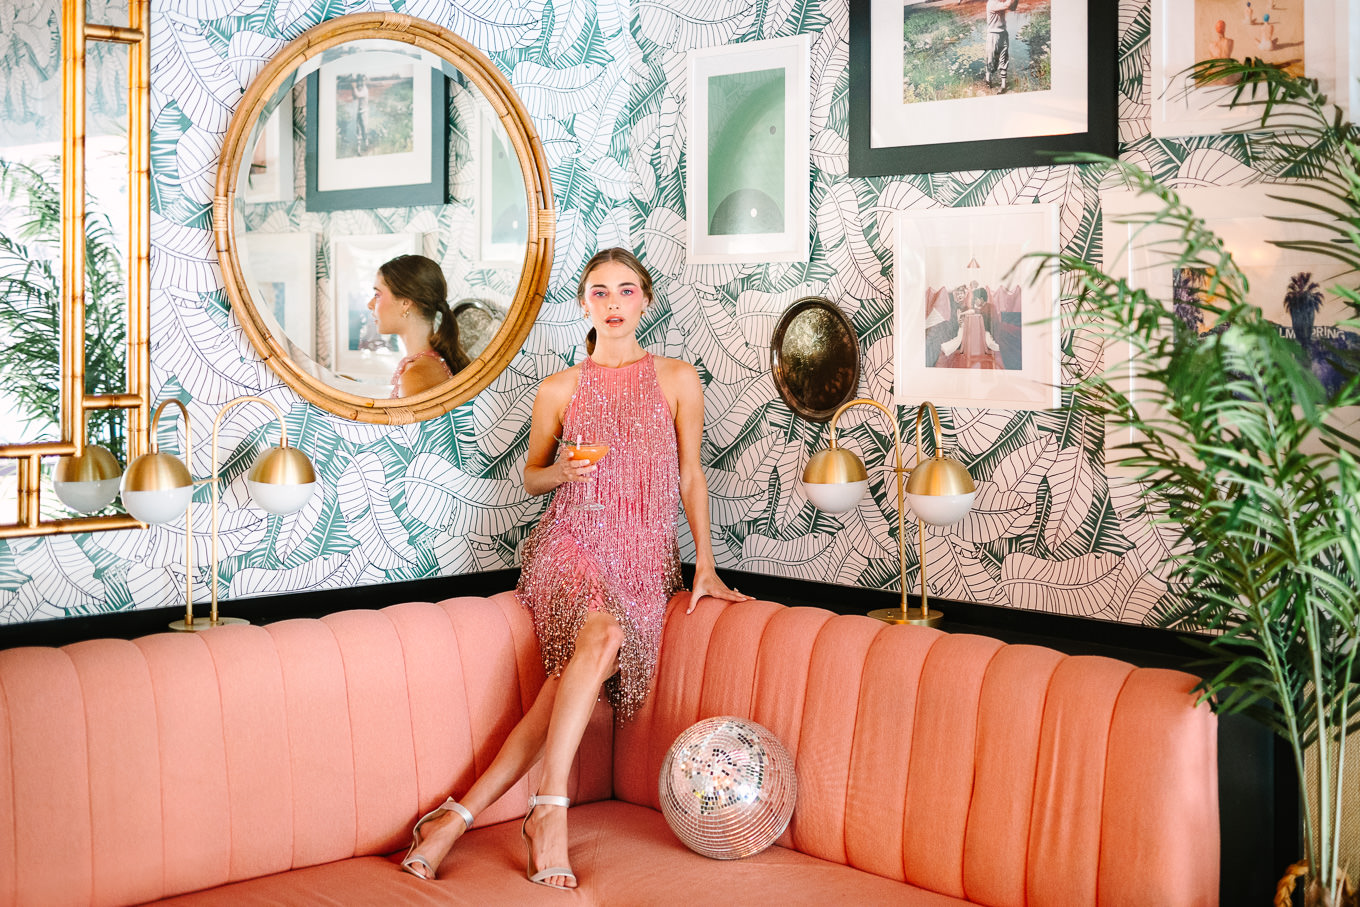 Disco ball in Pink Cabana Restaurant with pink beaded Naeem Khan dress | Kindred Presets x Mary Costa Photography Sands Hotel Ad Campaign | Colorful Palm Springs wedding photography | #palmspringsphotographer #lightroompresets #sandshotel #pinkhotel   Source: Mary Costa Photography | Los Angeles